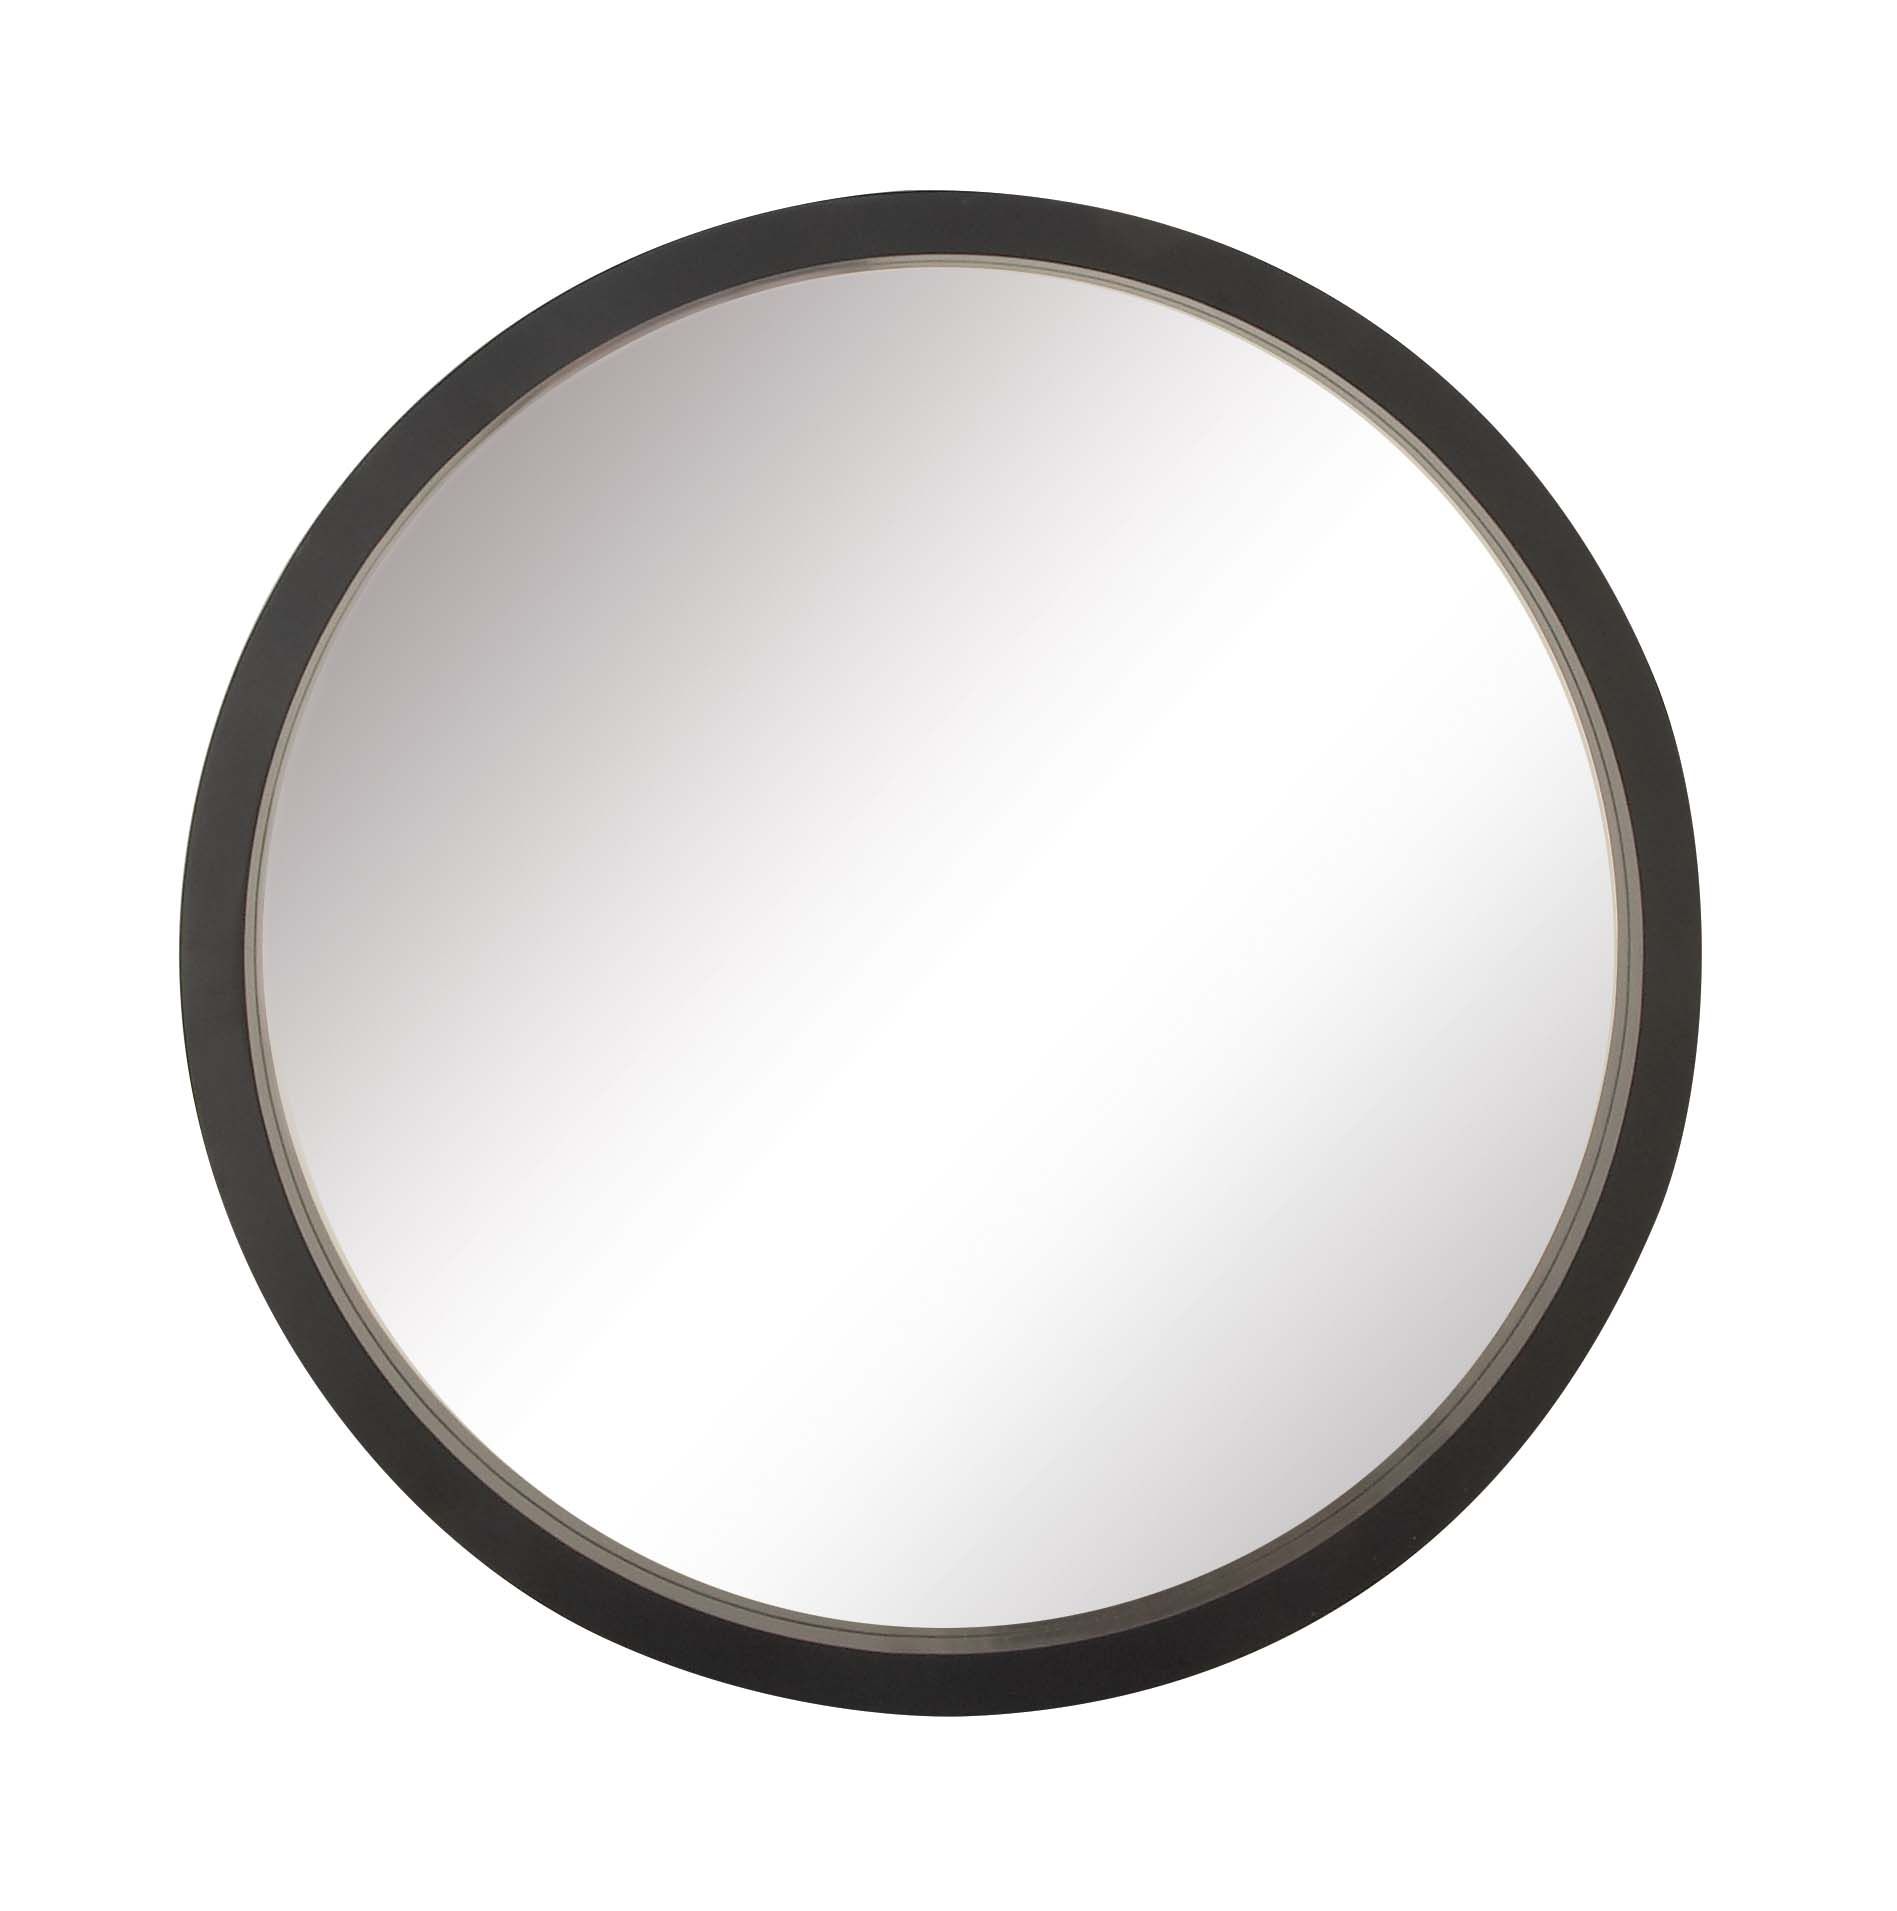 Decmode 32 Inch Contemporary Wooden Framed Round Wall Mirror, Black Intended For Black Openwork Round Metal Wall Mirrors (View 1 of 15)